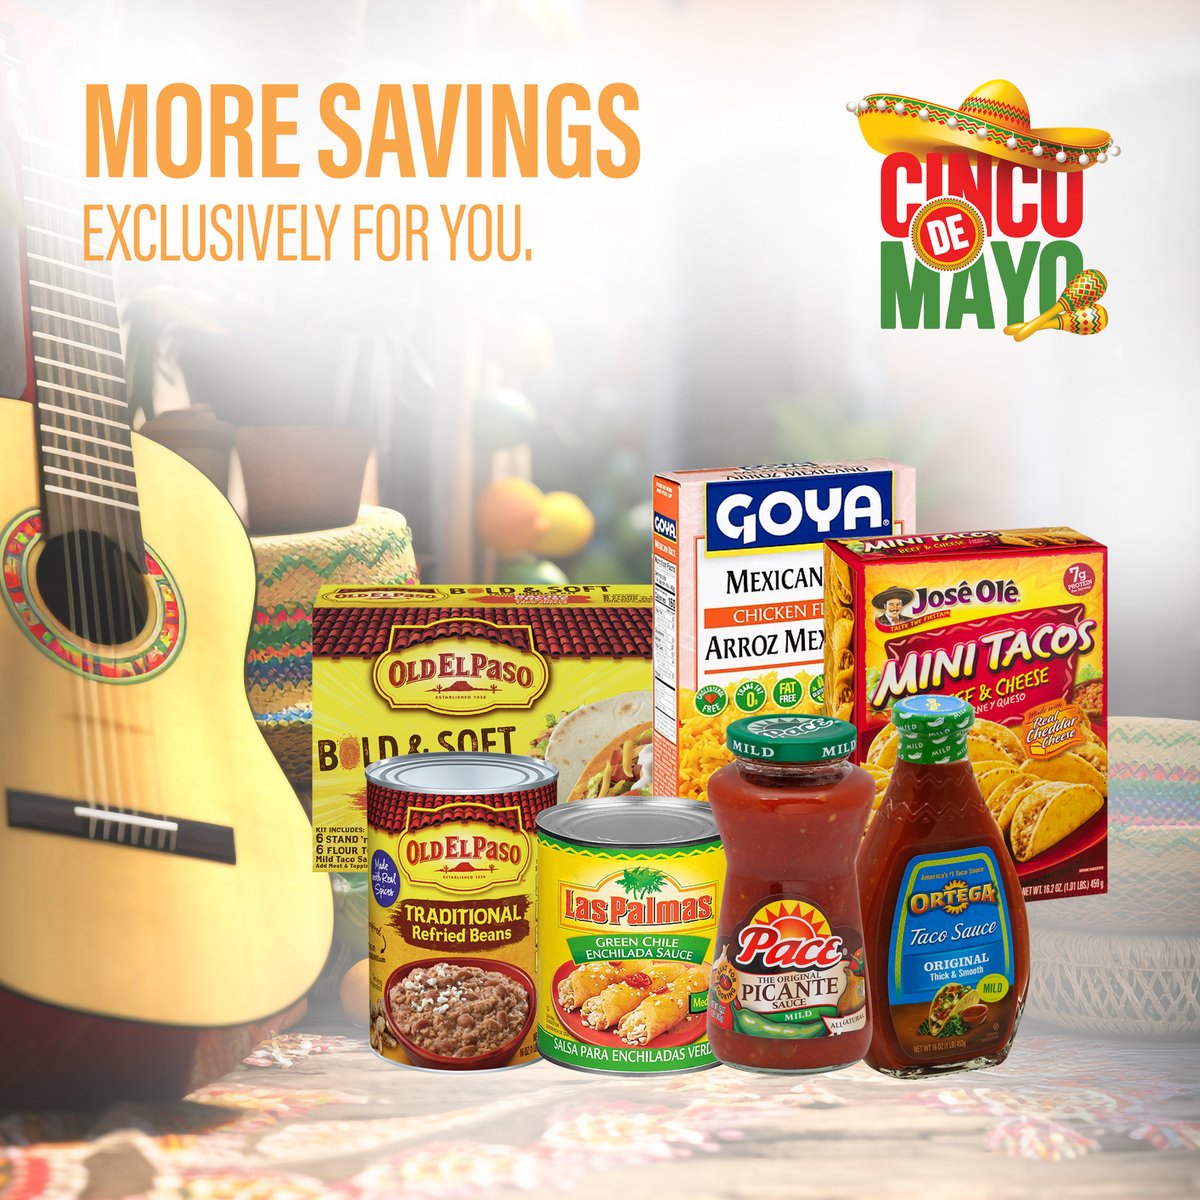 Stock Up at your Commissary with Savings for your Fiesta! To view more savings, visit: shop.commissaries.com/store-flyer #commissarysavings #cincodemayo #fiesta